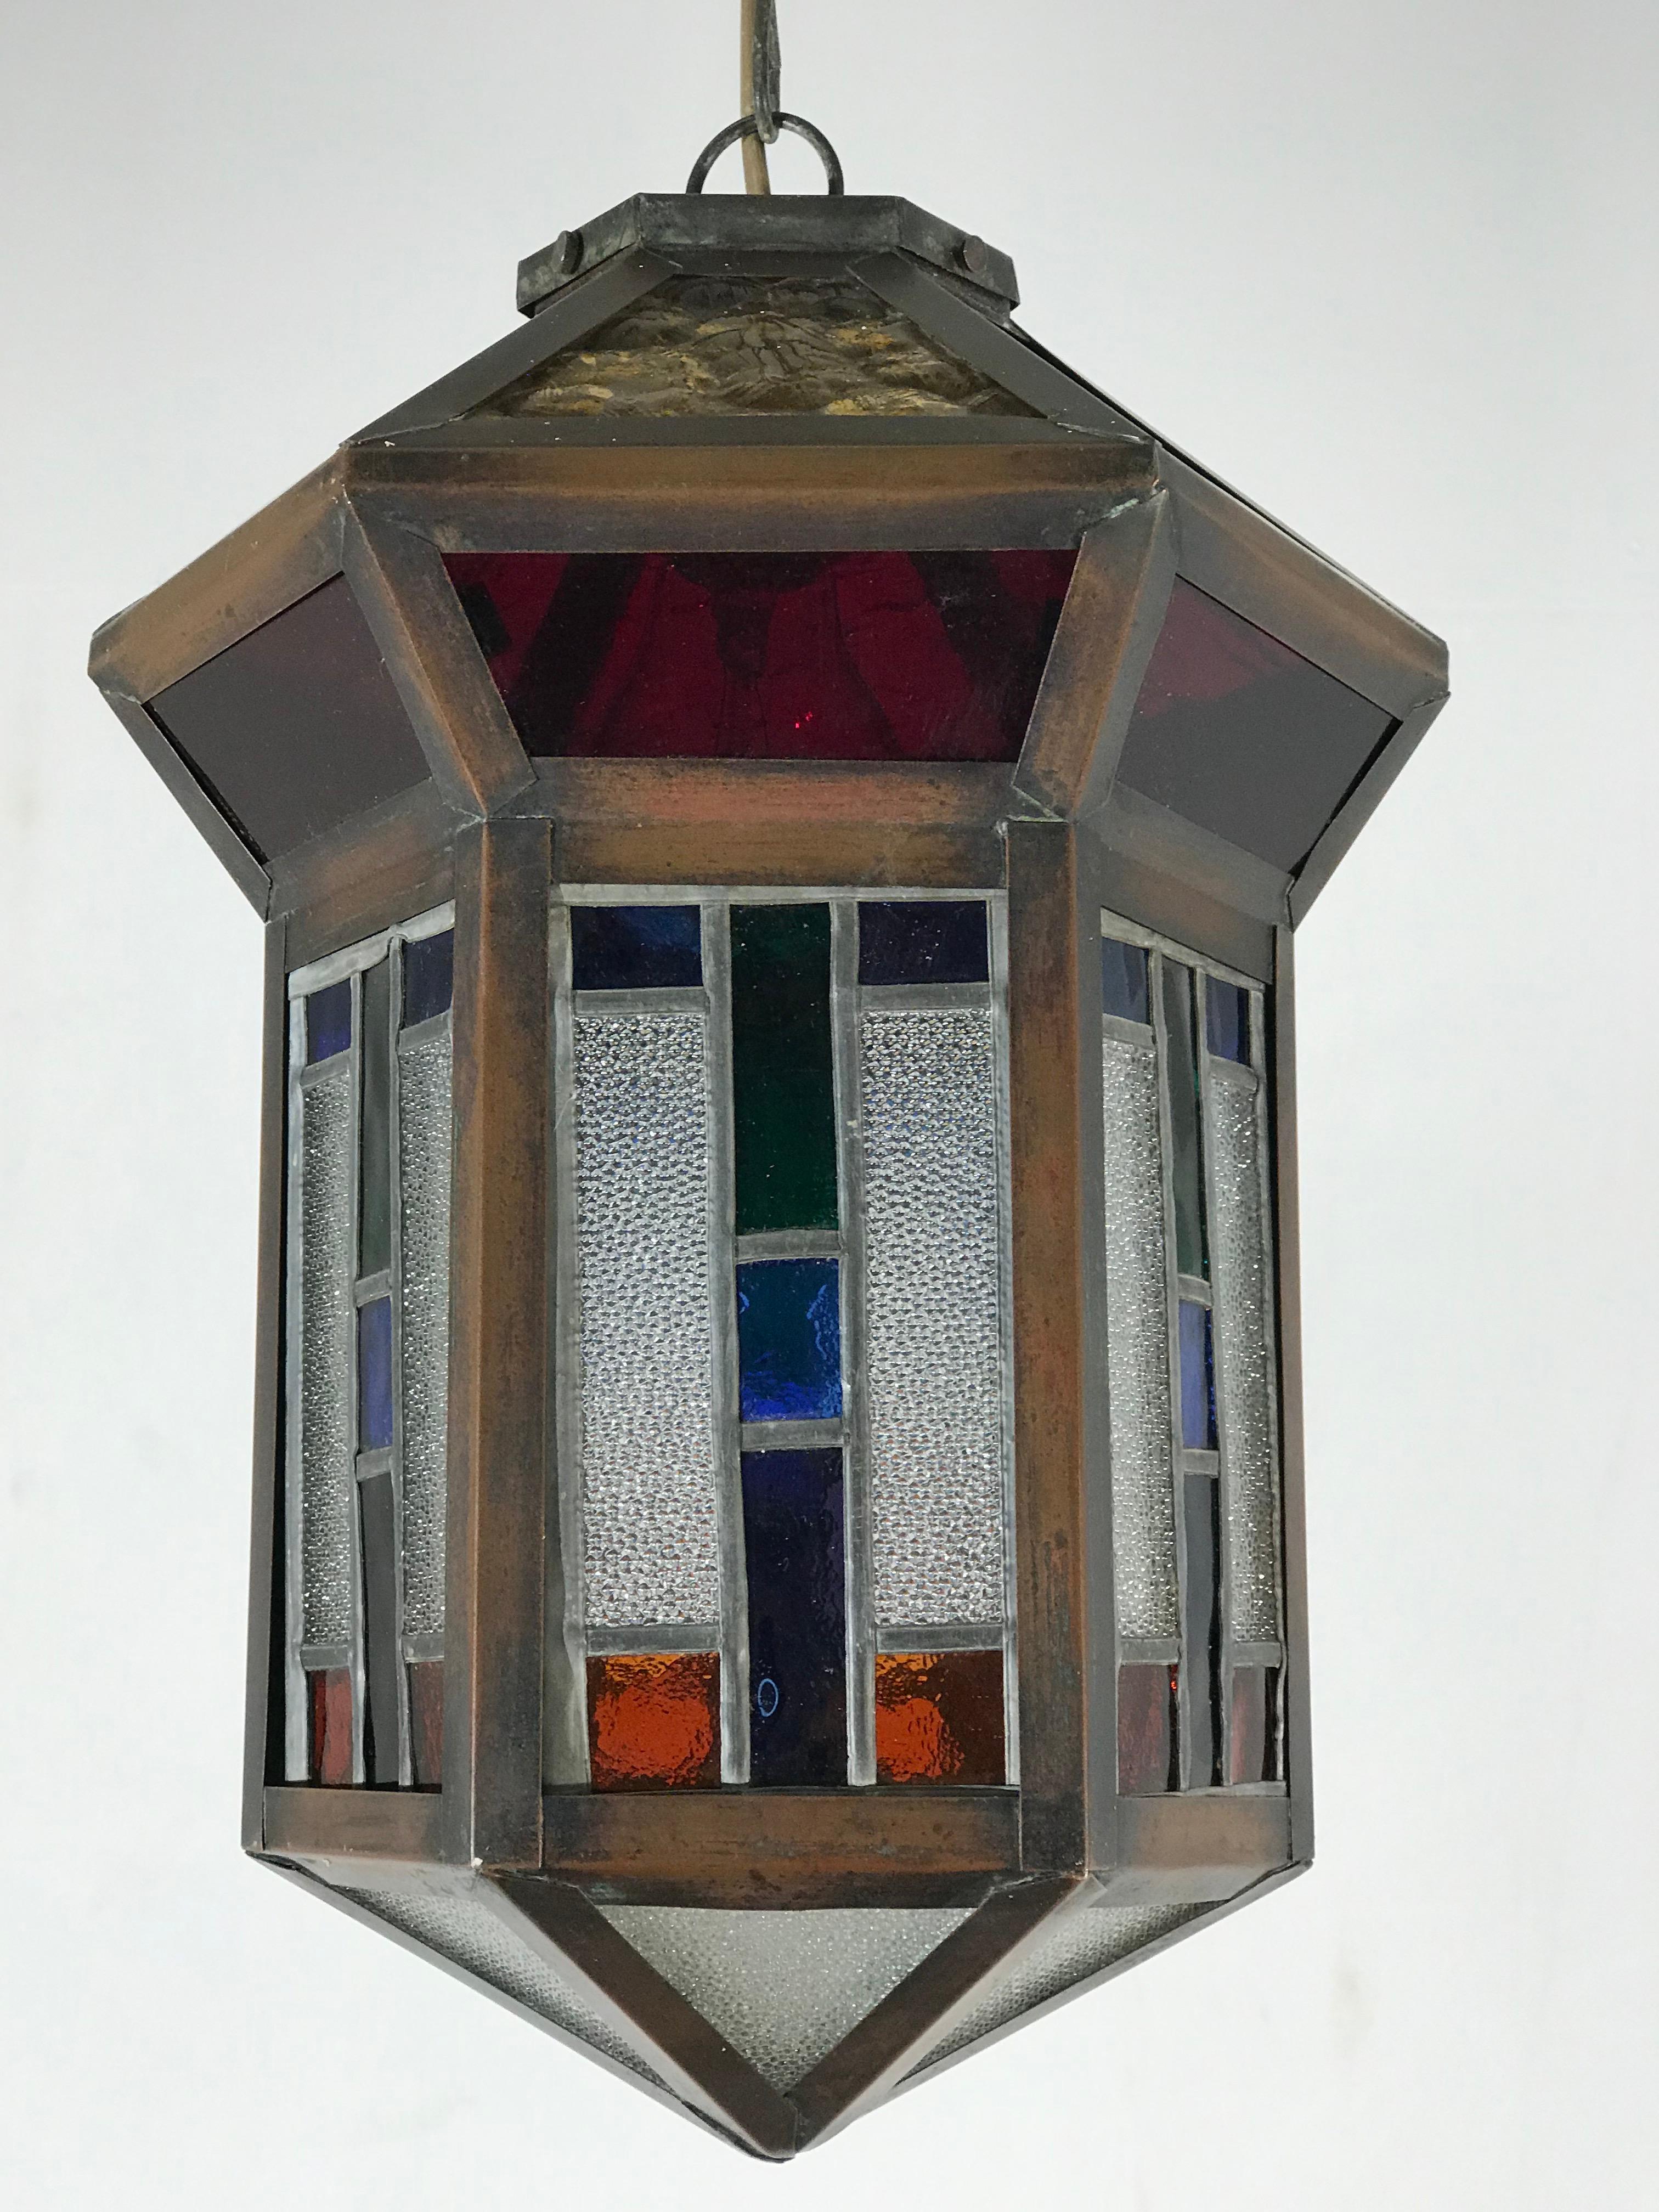 Wonderful ceiling lamp for the perfect ambiance.

If you are looking for a rare, beautiful and geometric design Art Deco pendant then this unique specimen from the 1920s could be the one for you. This symmetrical pendant has several stunning,